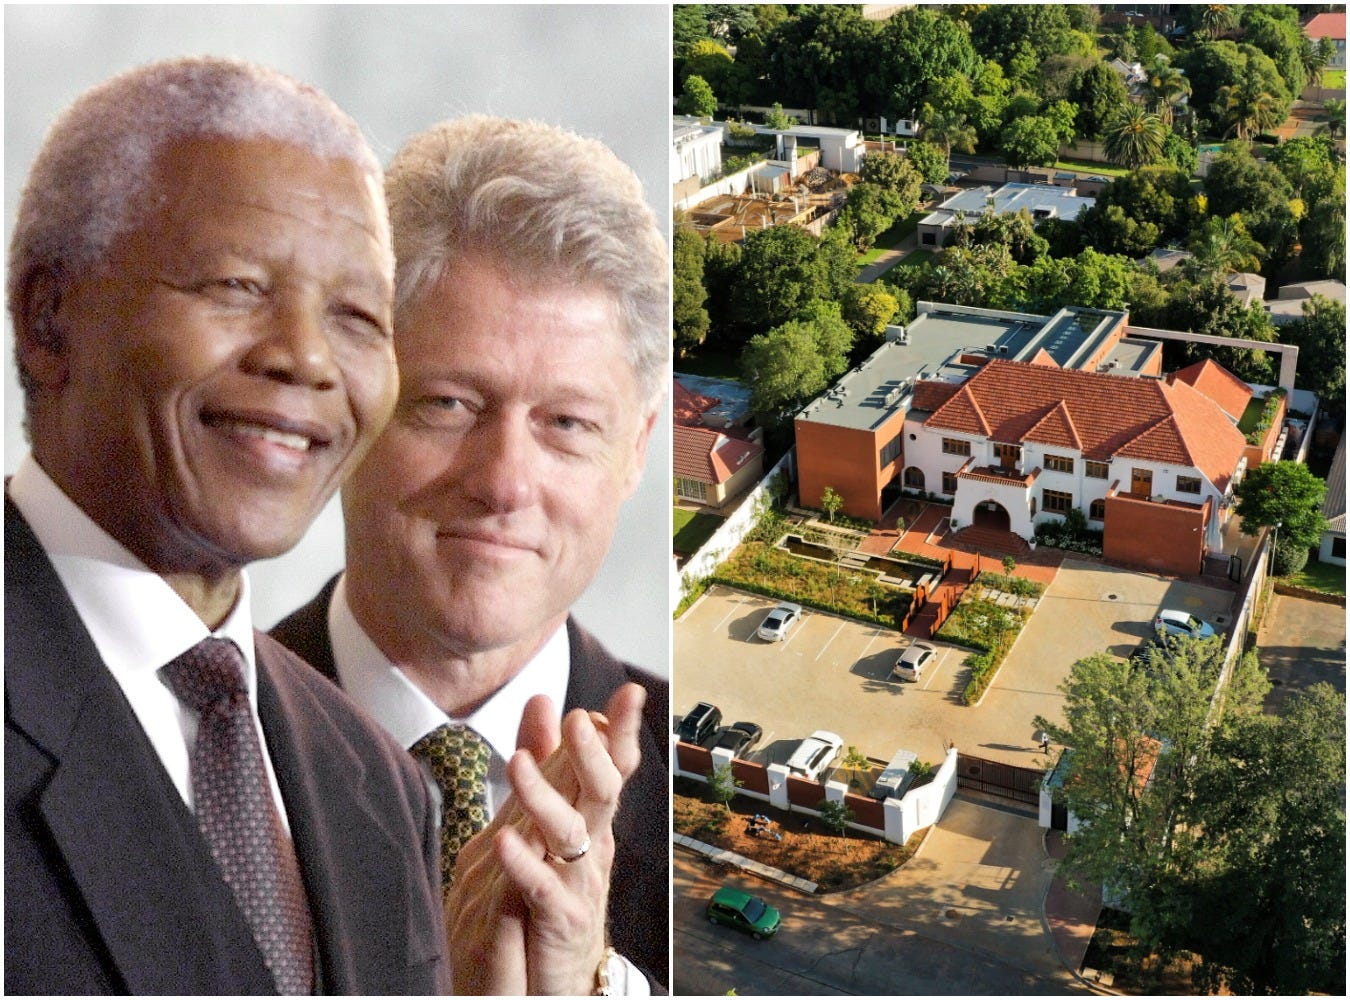 Nelson Mandela and Bill Clinton (left) and the Sanctuary Mandela hotel in Johannesburg (right).